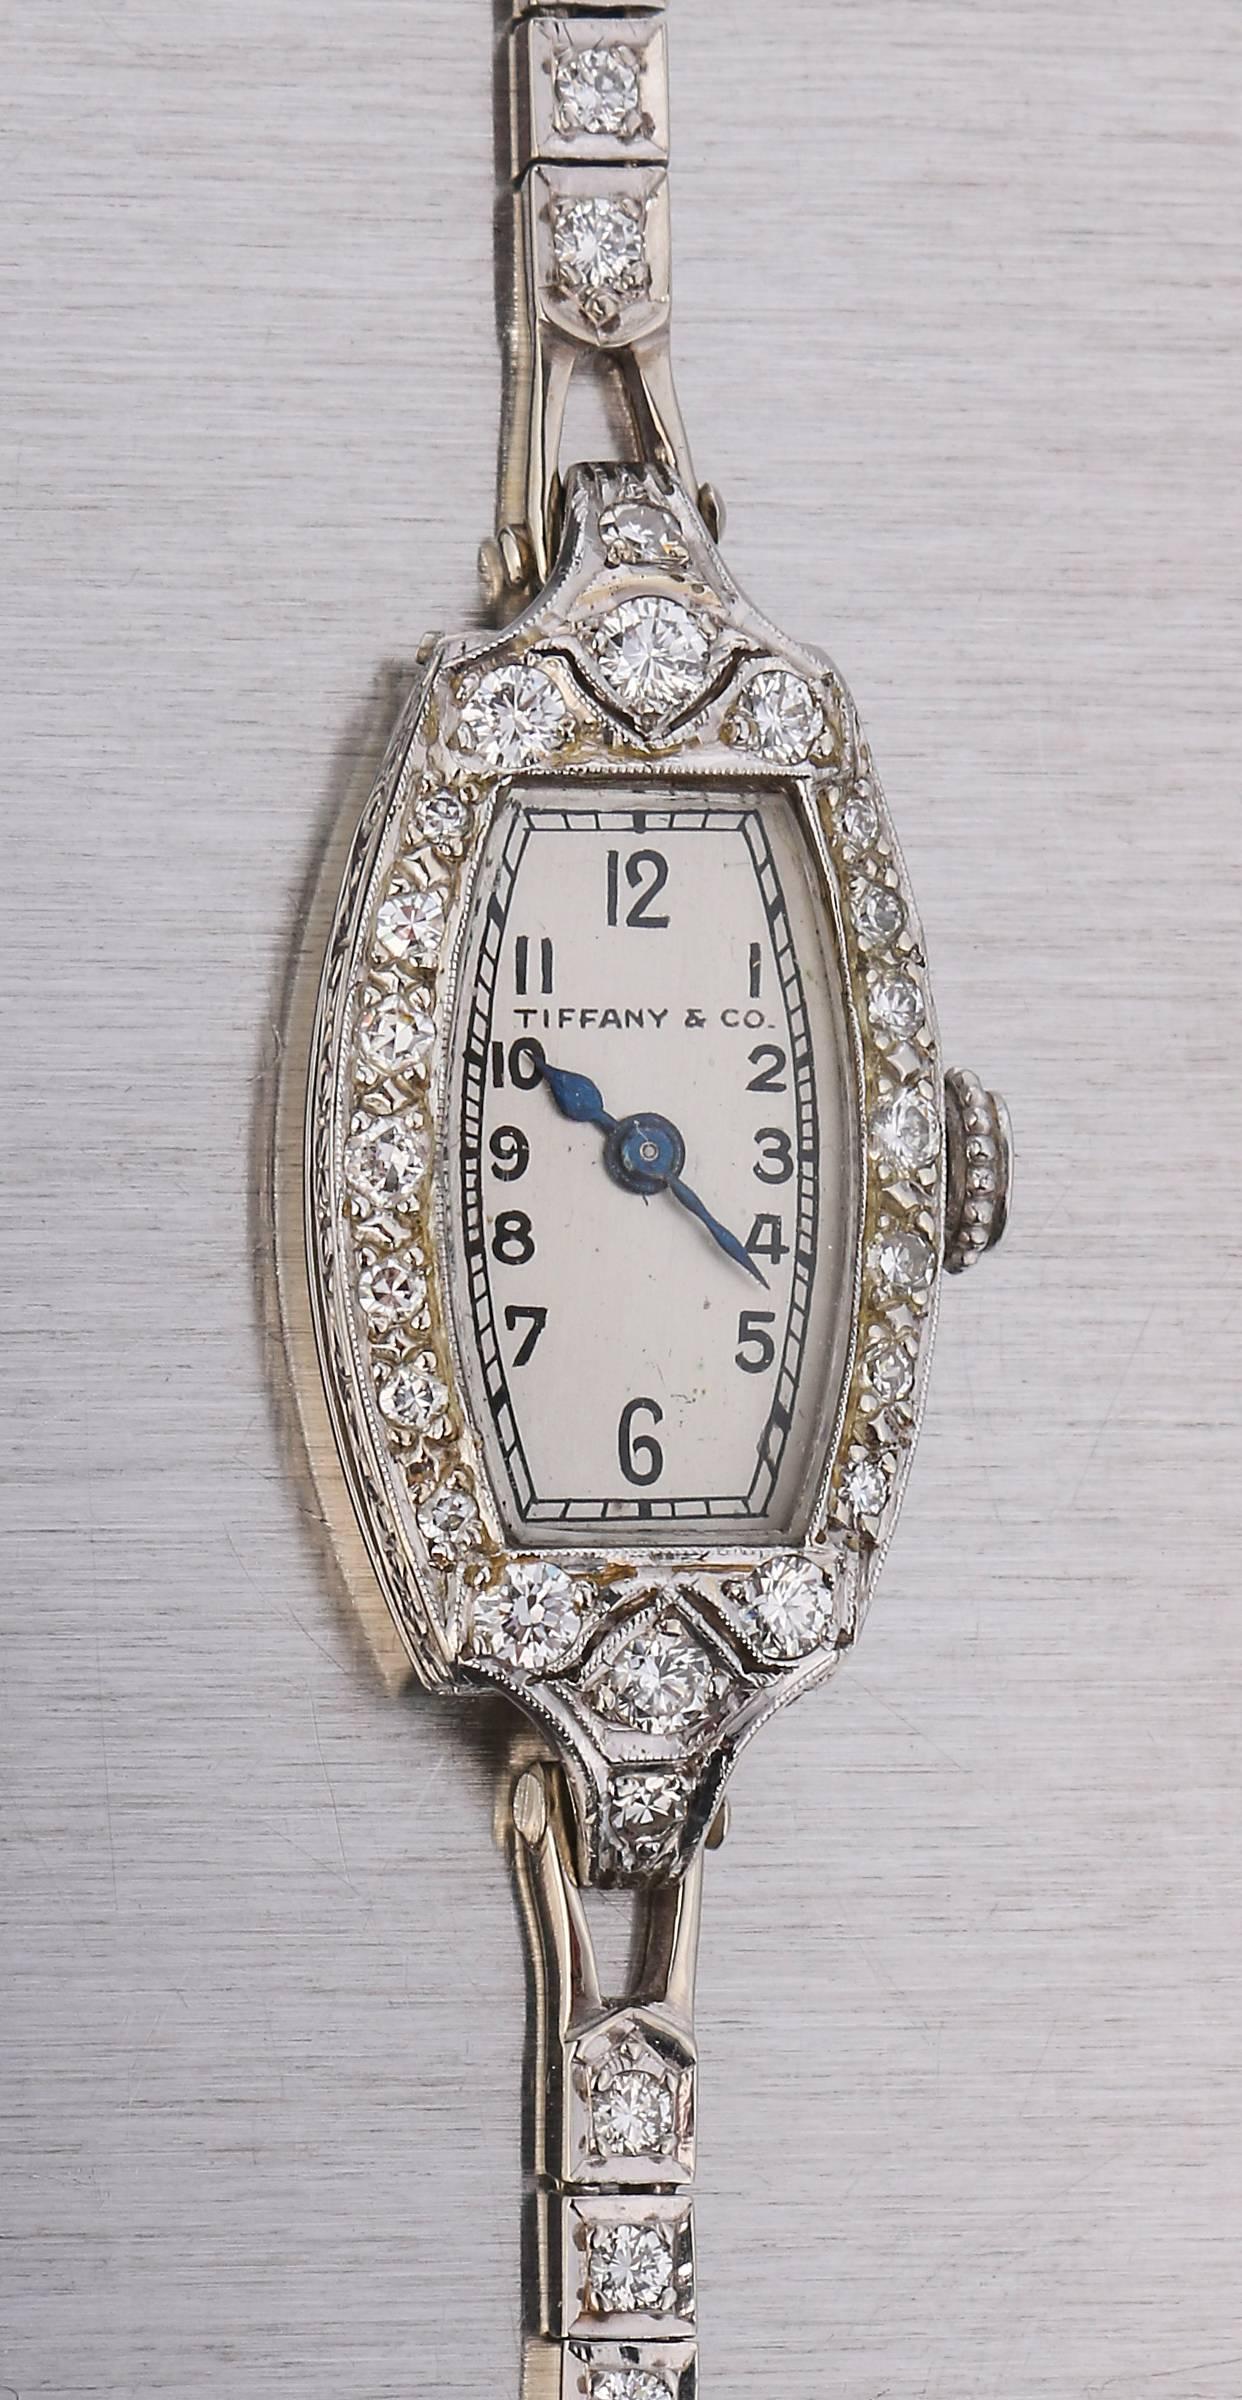 Early c.1930's Tiffany & Co. ladies diamond platinum Patek Philippe movement 14kt white gold link watch bracelet. Watch case is oblong (measures approximately 30 mm L x 16 mm W), with engraved etching on the sides, etched floral design crown, and